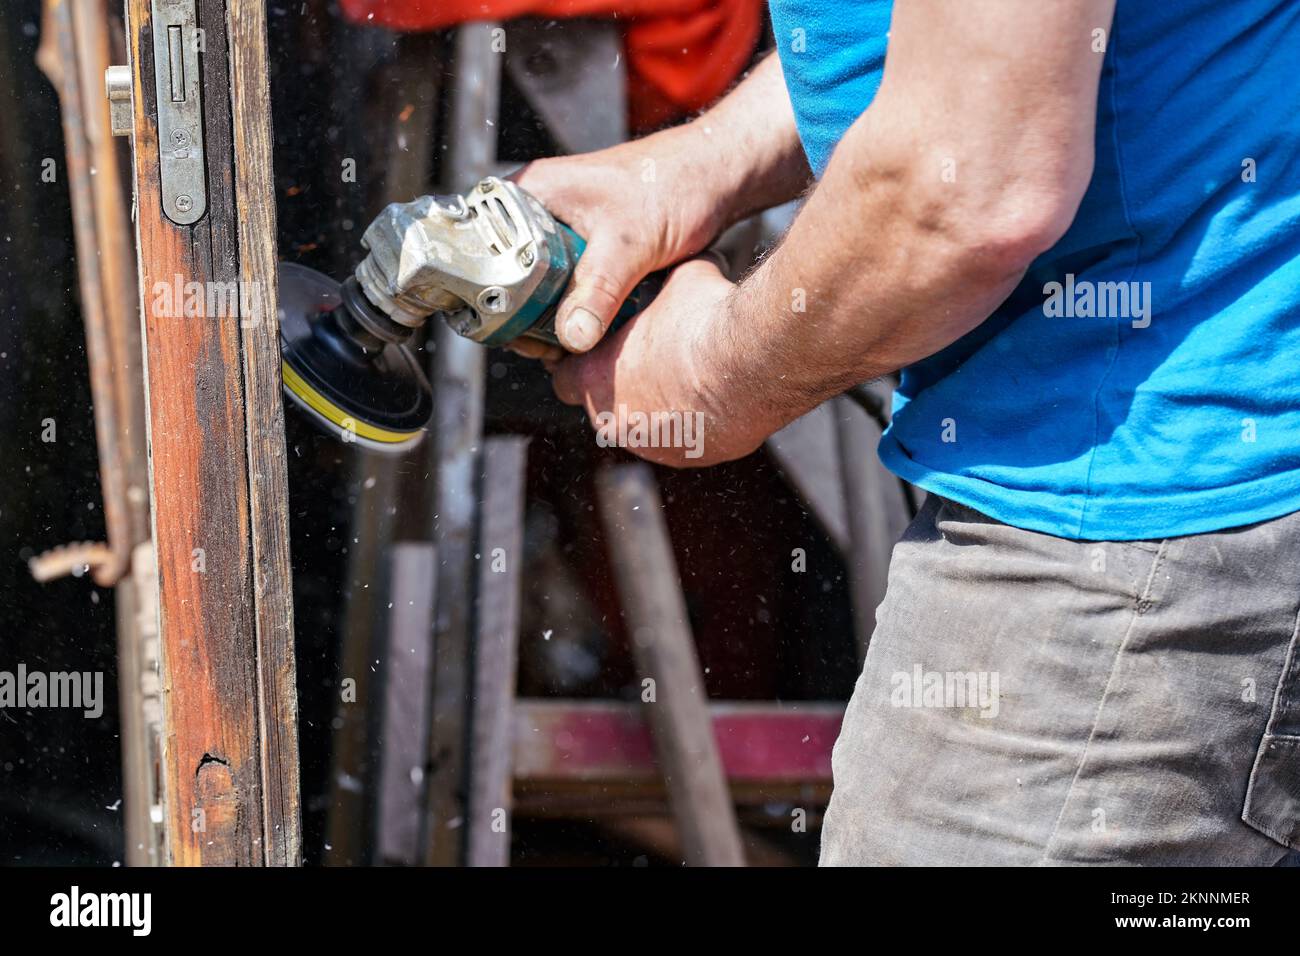 Man polishing wooden door with old angle grinder during sunny day, closeup detail to hands without gloves, fine wood dust flying in air Stock Photo